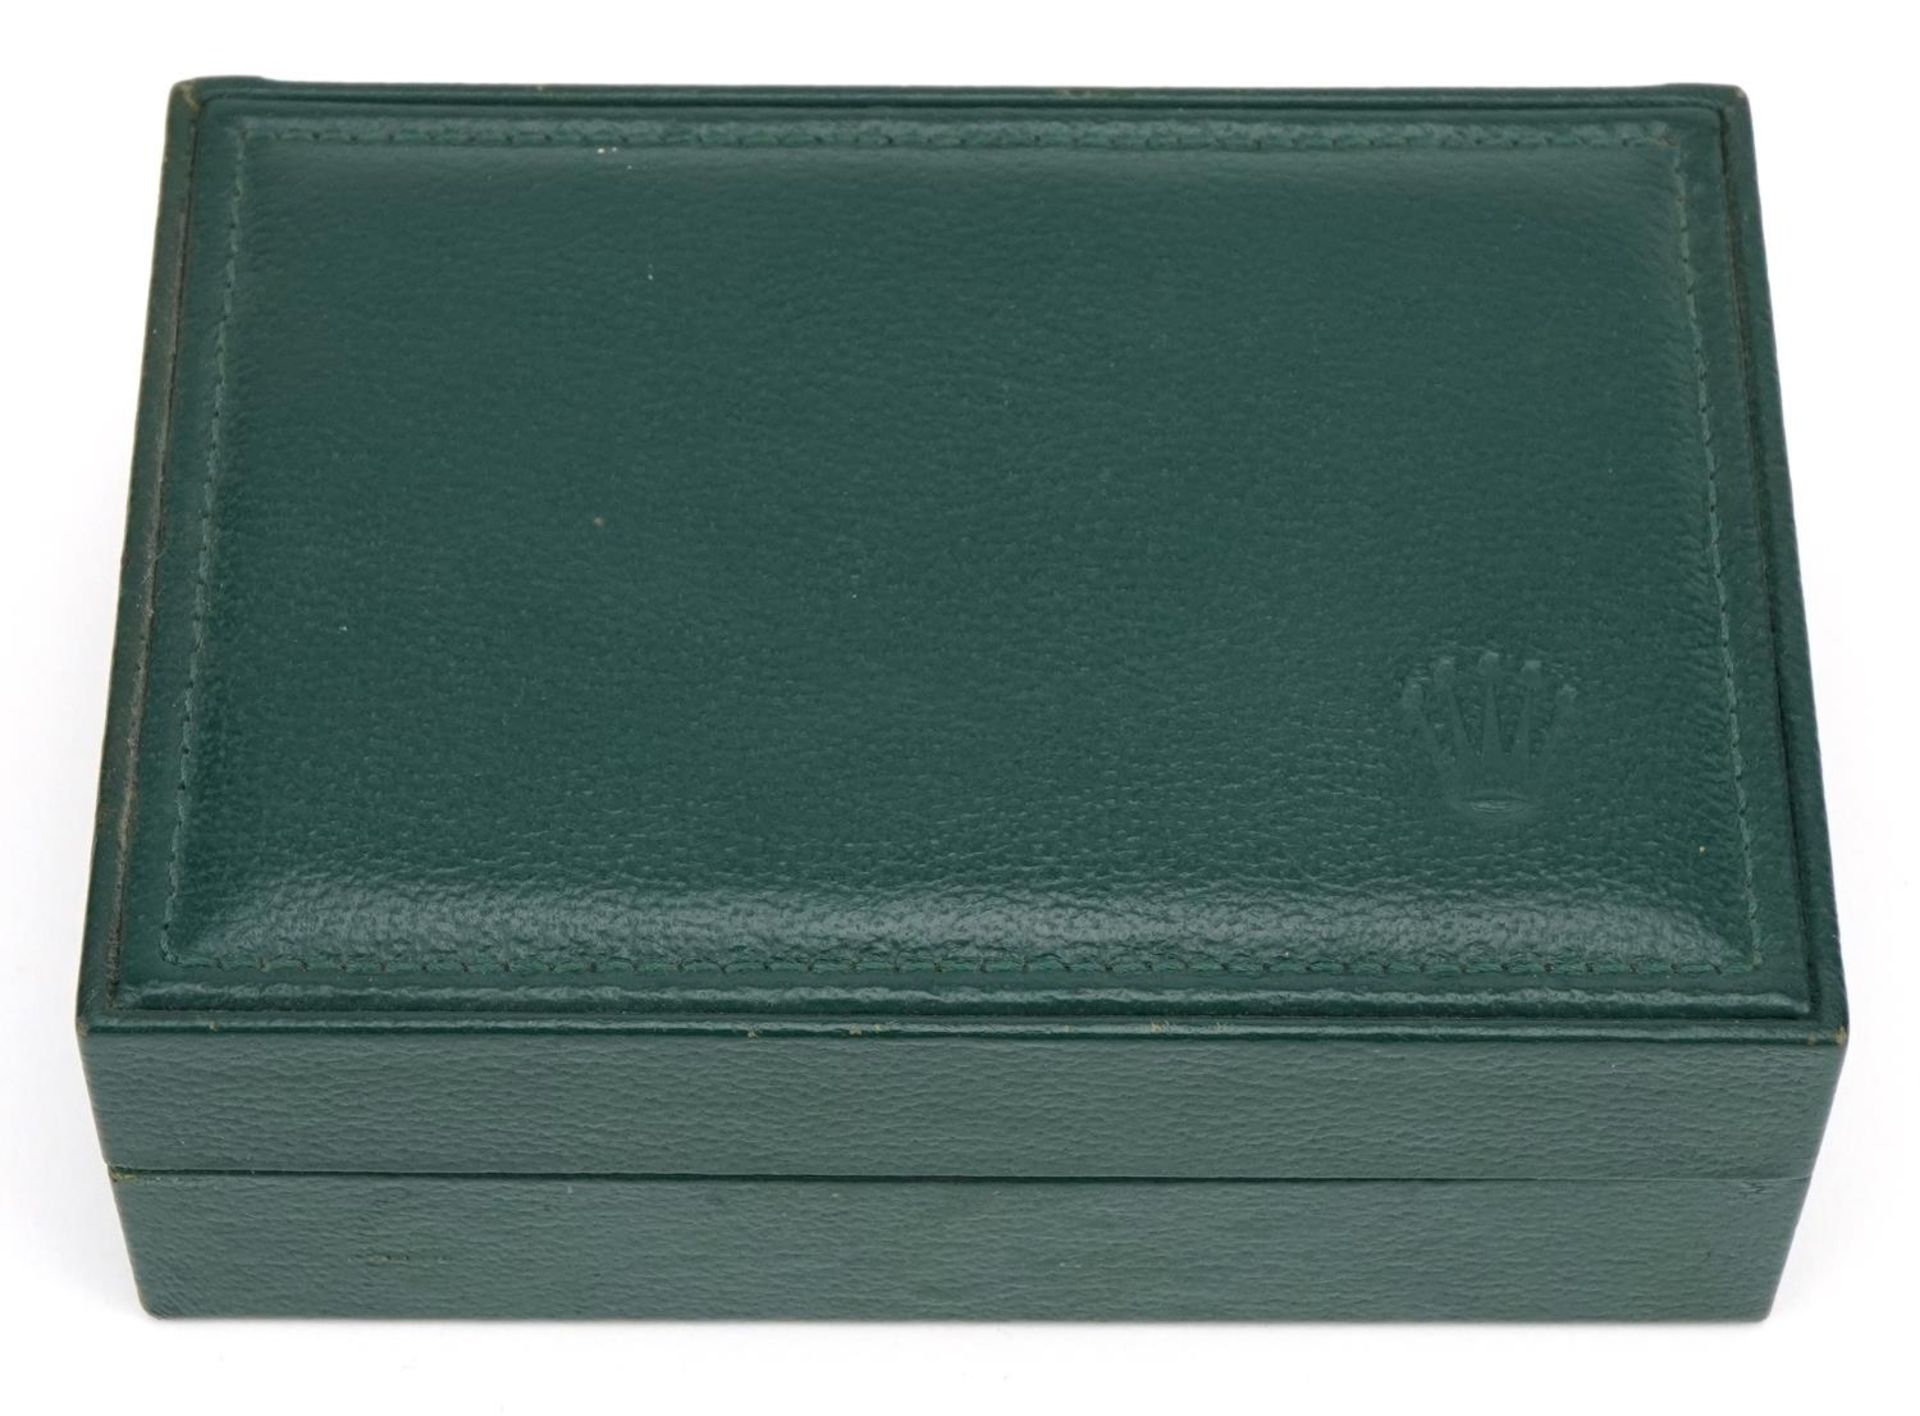 Rolex green leather wristwatch box, 14.5cm wide : For further information on this lot please visit - Image 3 of 5